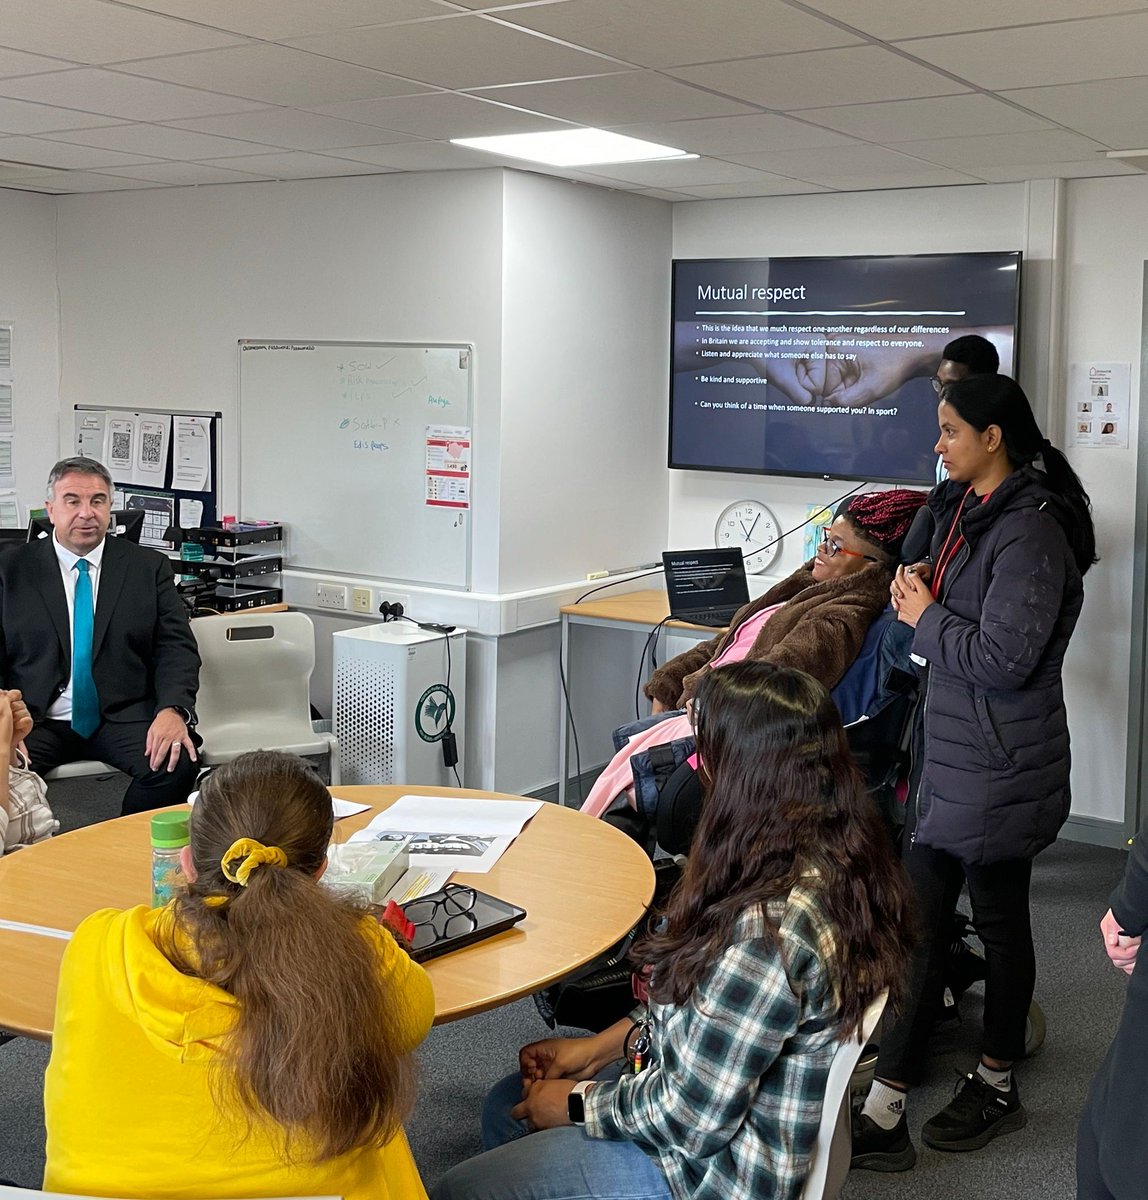 We were delighted to welcome @tuckwell_steve, MP for Uxbridge & South Ruislip, to our College centre in Hillingdon. Mr Tuckwell was given a tour of the building and took part in a Q&A session with our WorkStart students, concerning local provision and accessibility in the area.